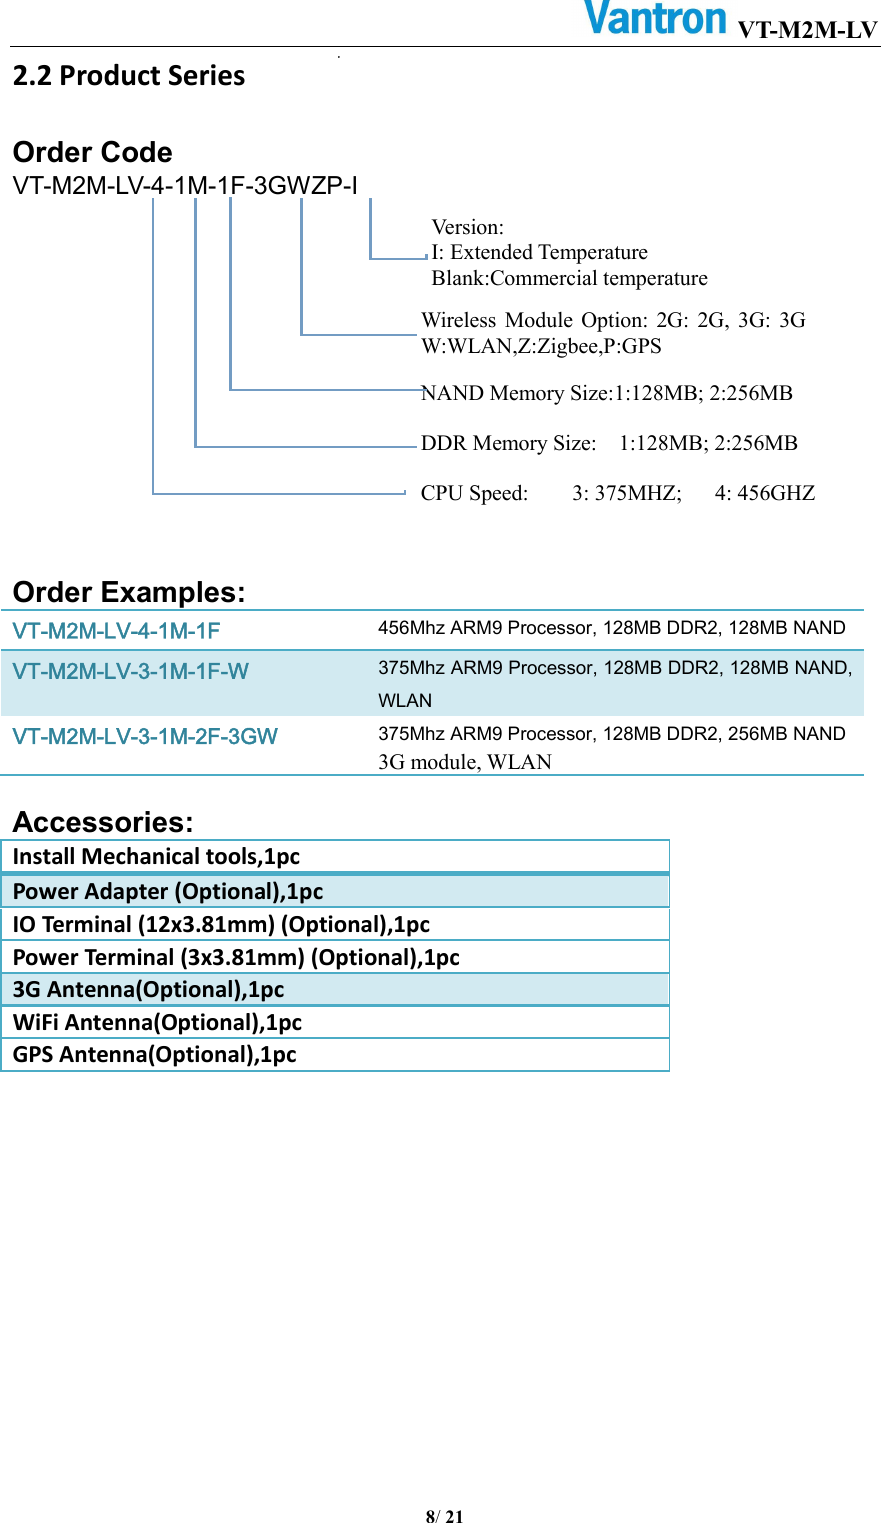 VT-M2M-LV       8/ 21  2.2 Product Series  Order Code VT-M2M-LV-4-1M-1F-3GWZP-I                                                 Order Examples: VT-M2M-LV-4-1M-1F  456Mhz ARM9 Processor, 128MB DDR2, 128MB NAND VT-M2M-LV-3-1M-1F-W  375Mhz ARM9 Processor, 128MB DDR2, 128MB NAND, WLAN VT-M2M-LV-3-1M-2F-3GW  375Mhz ARM9 Processor, 128MB DDR2, 256MB NAND 3G module, WLAN  Accessories: Install Mechanical tools,1pc Power Adapter (Optional),1pc IO Terminal (12x3.81mm) (Optional),1pc Power Terminal (3x3.81mm) (Optional),1pc 3G Antenna(Optional),1pc WiFi Antenna(Optional),1pc GPS Antenna(Optional),1pc   Version: I: Extended Temperature Blank:Commercial temperature Wireless  Module  Option:  2G:  2G,  3G:  3G W:WLAN,Z:Zigbee,P:GPS  NAND Memory Size:1:128MB; 2:256MB   DDR Memory Size:    1:128MB; 2:256MB CPU Speed:        3: 375MHZ;      4: 456GHZ 